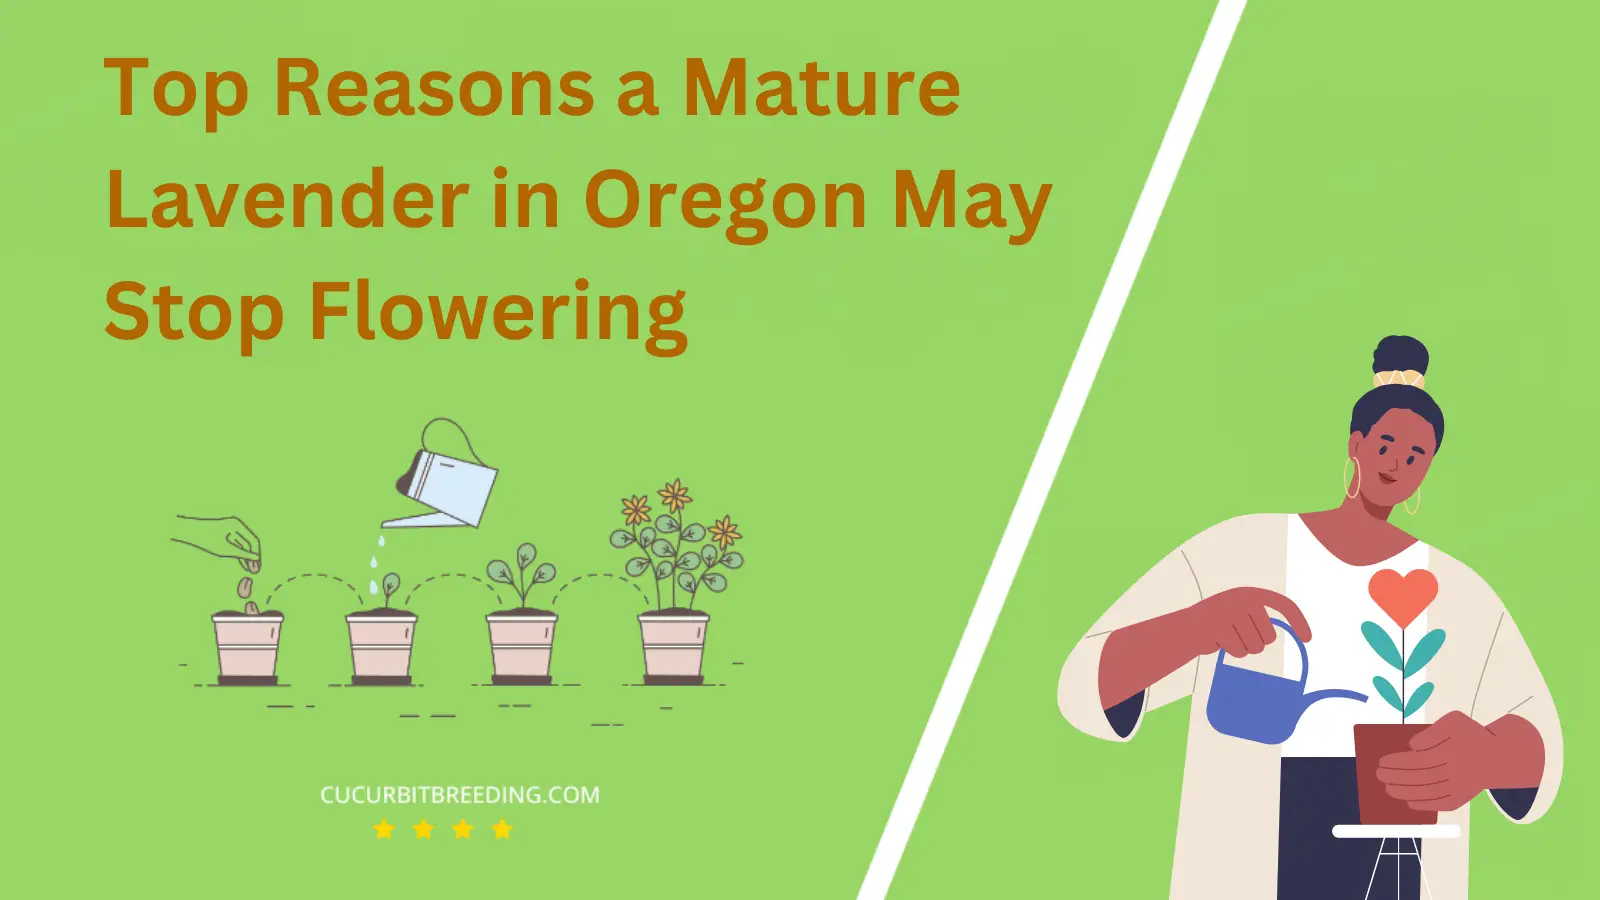 Top Reasons a Mature Lavender in Oregon May Stop Flowering